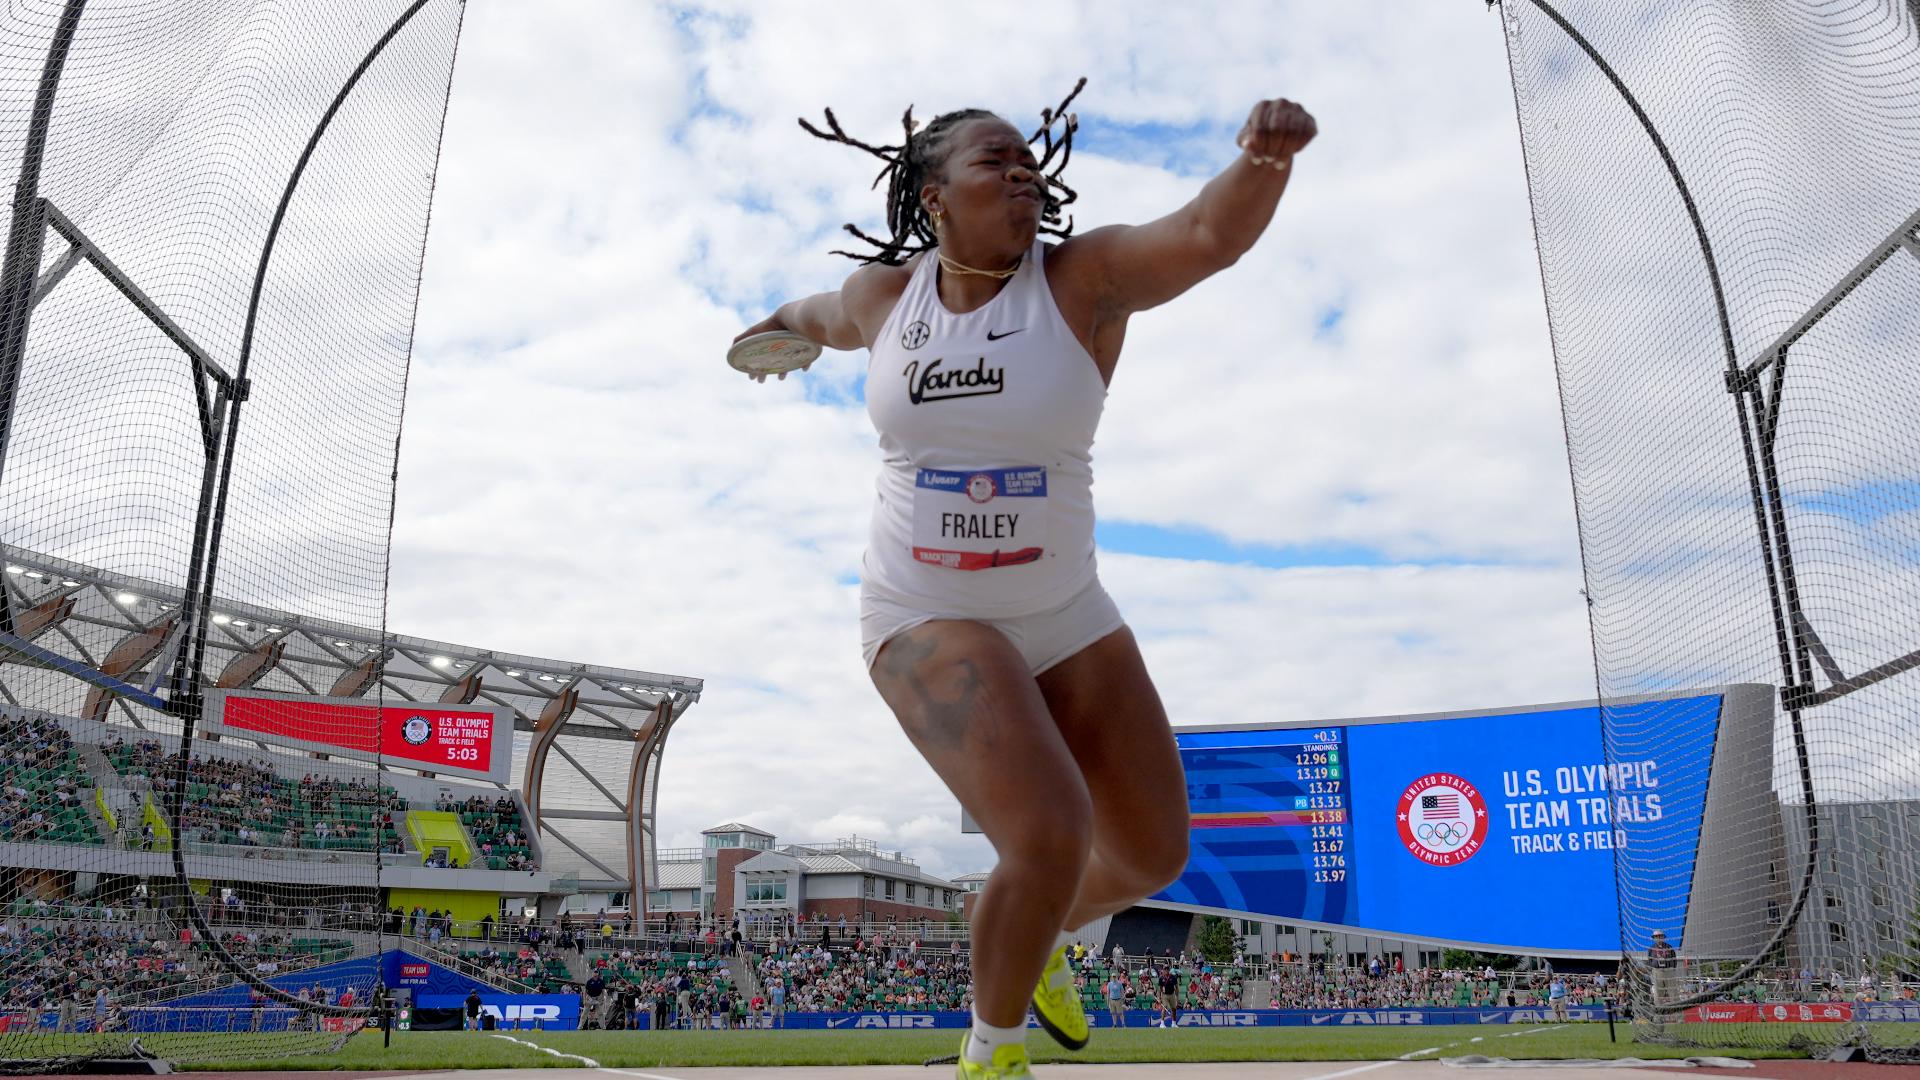 Vanderbilt's discus thrower and Olympian Veronica Fraley recently said she wasn't going to have enough money to make rent this month.